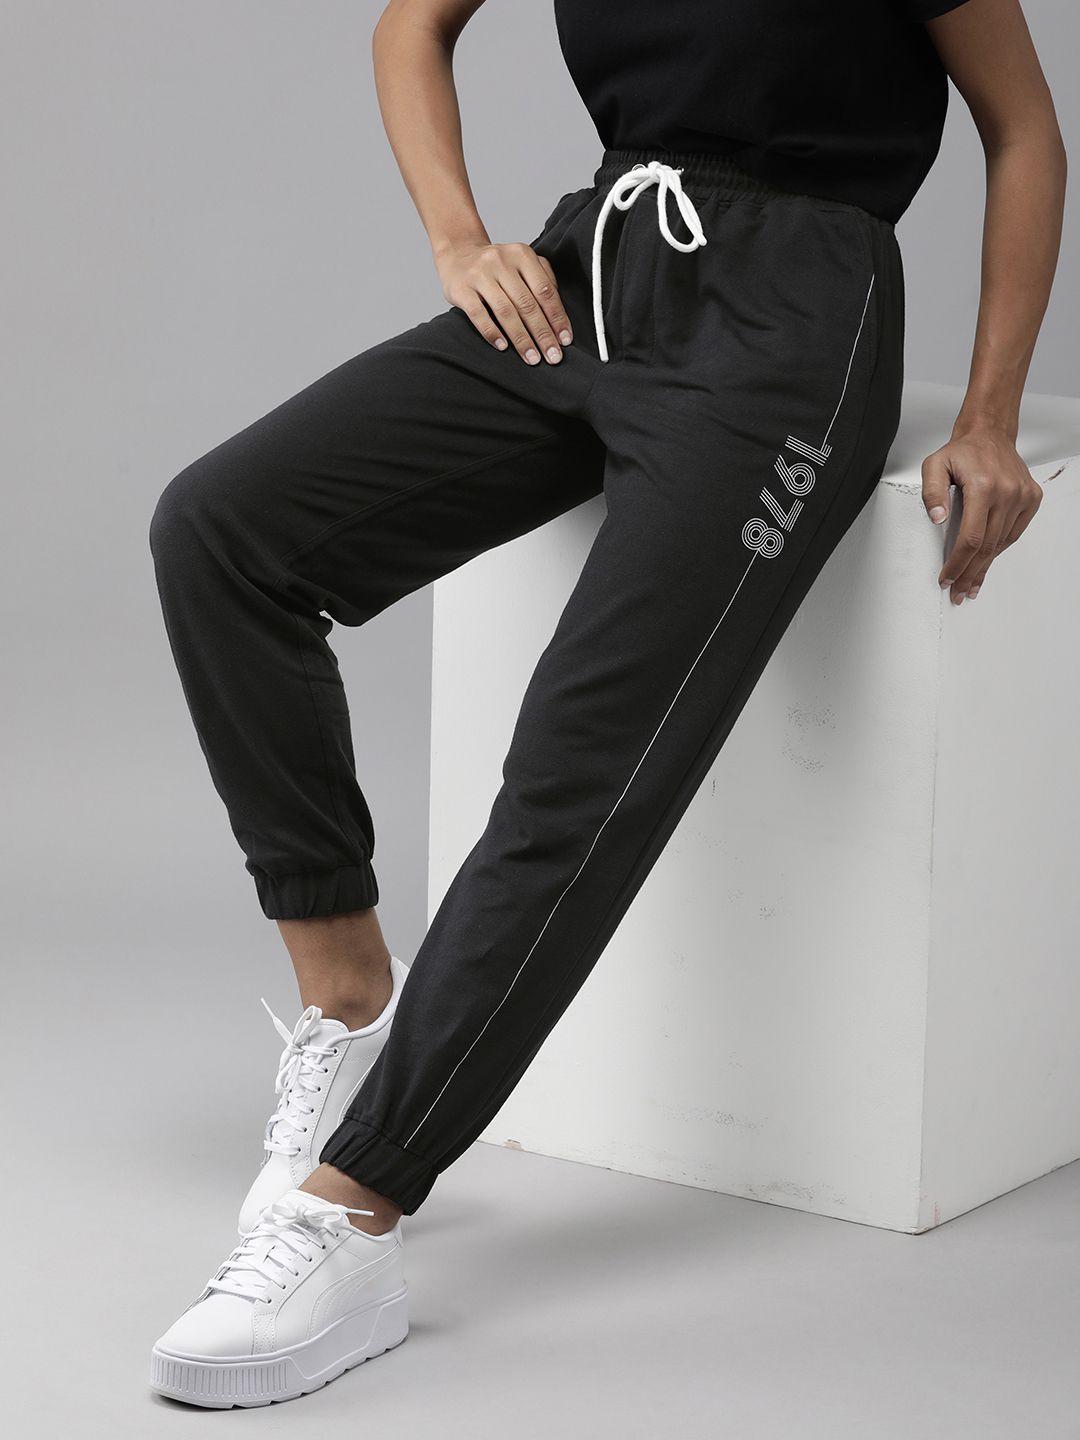 the roadster lifestyle co. women black printed joggers